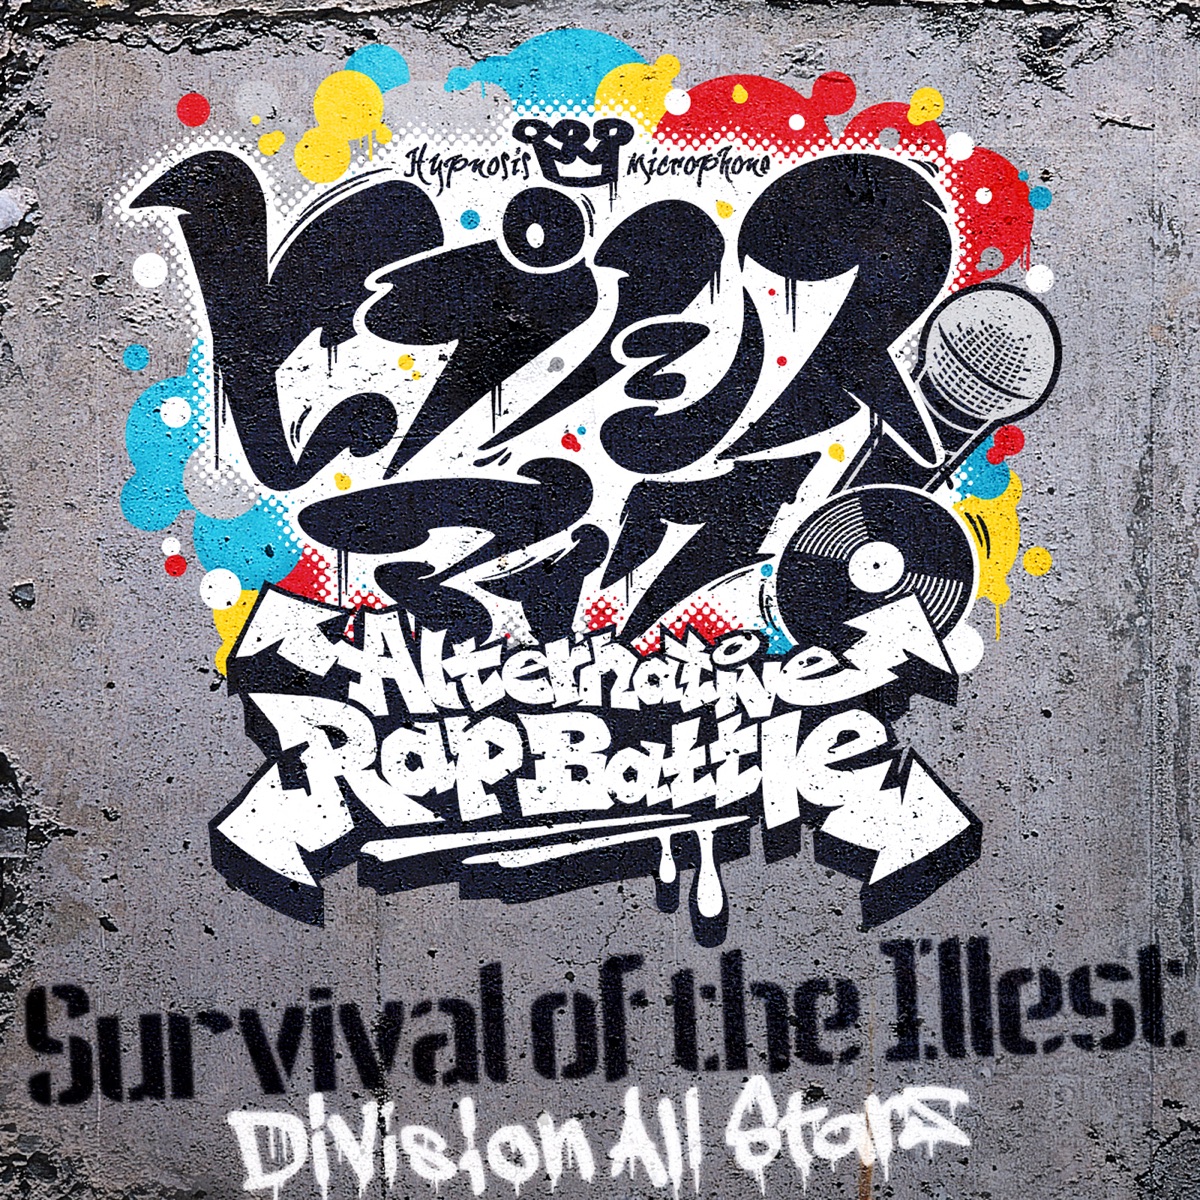 『Division All Stars - Survival of the Illest』収録の『Survival of the Illest』ジャケット